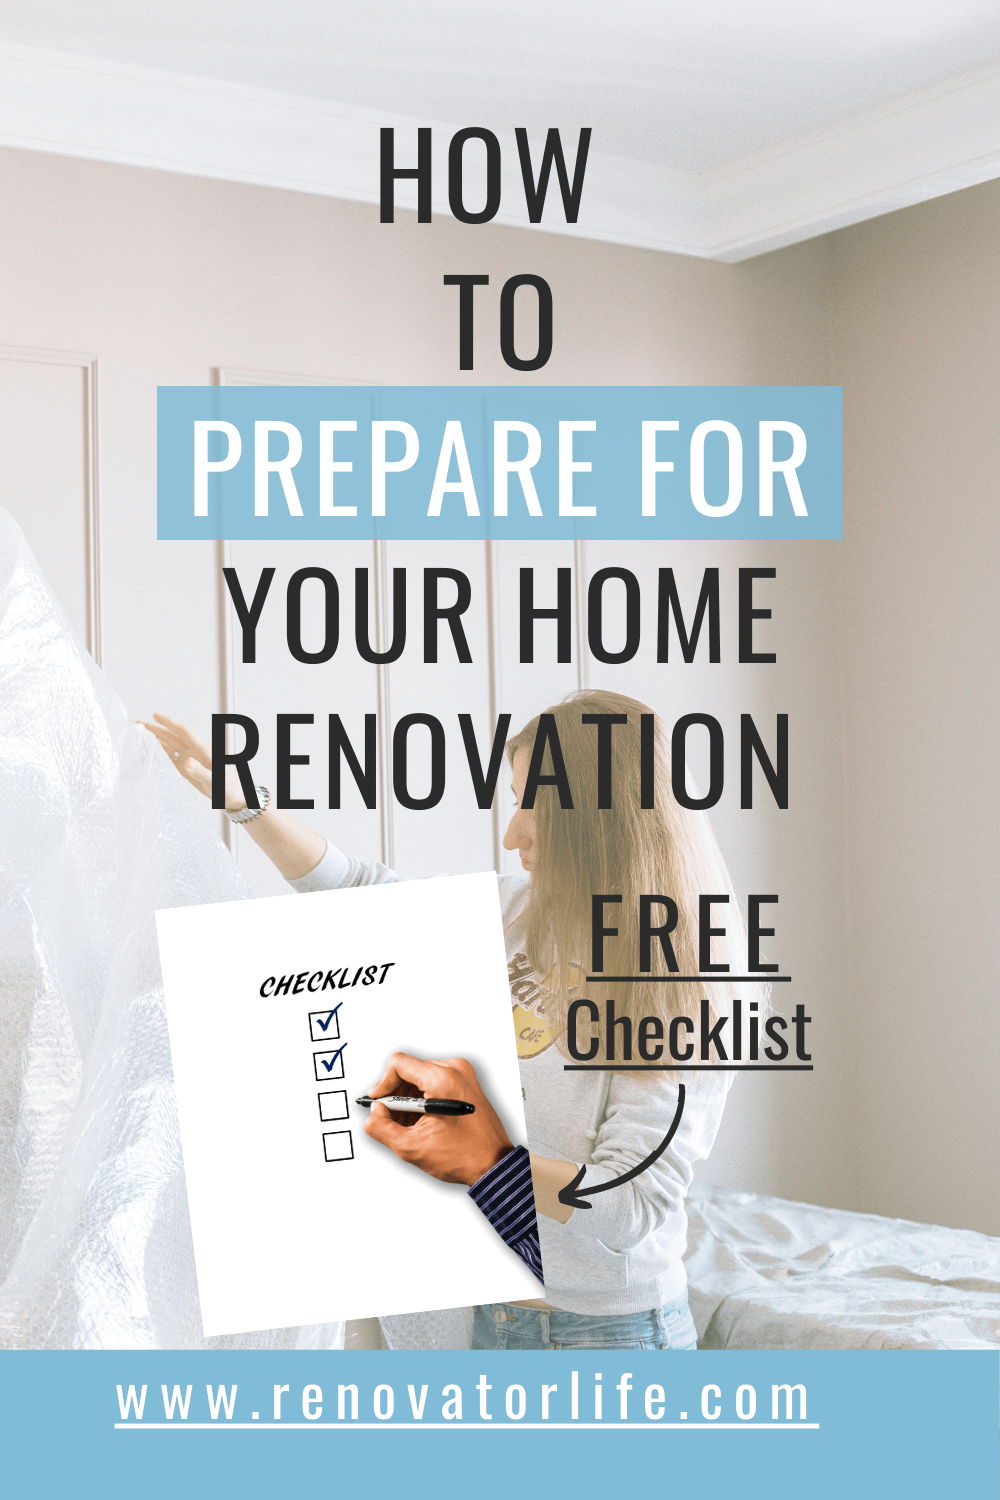 How To Prepare for Your home Renovation